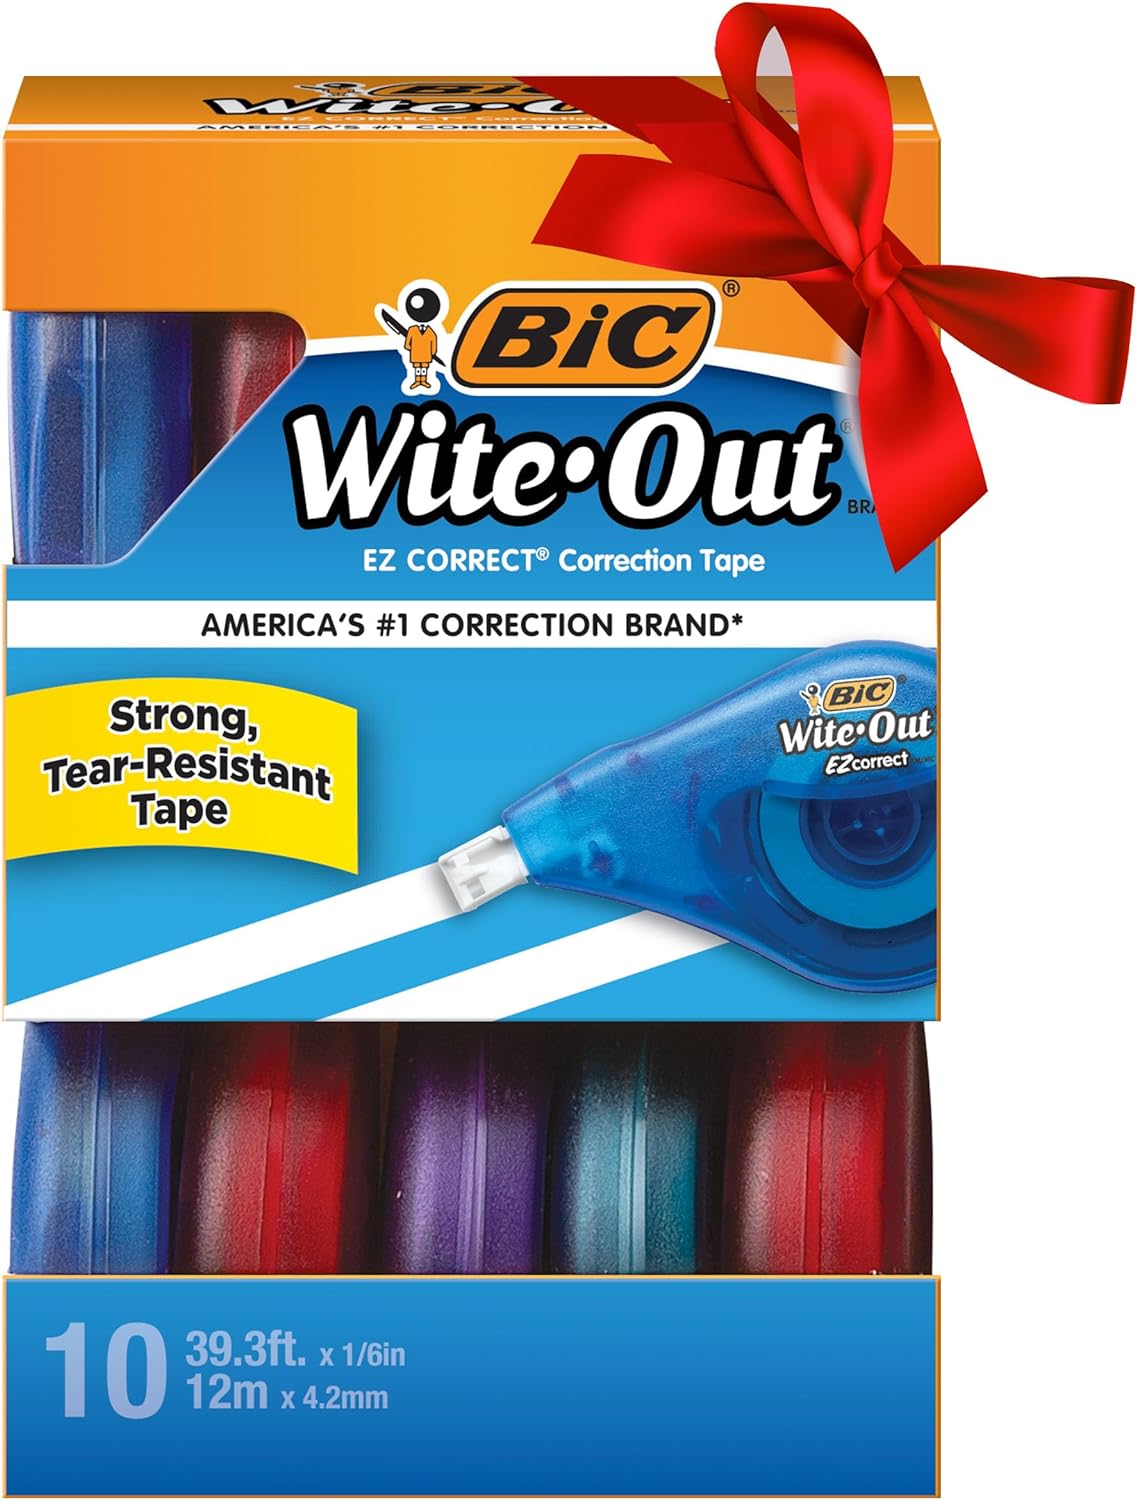 BIC Wite-Out Brand EZ Correct Correction Tape (WOTAP10- WHI), 39.3 Feet, 10-Count Pack of white Correction Tape, Fast, Clean and Easy to Use Tear-Resistant Tape, Gift Sets for Teachers